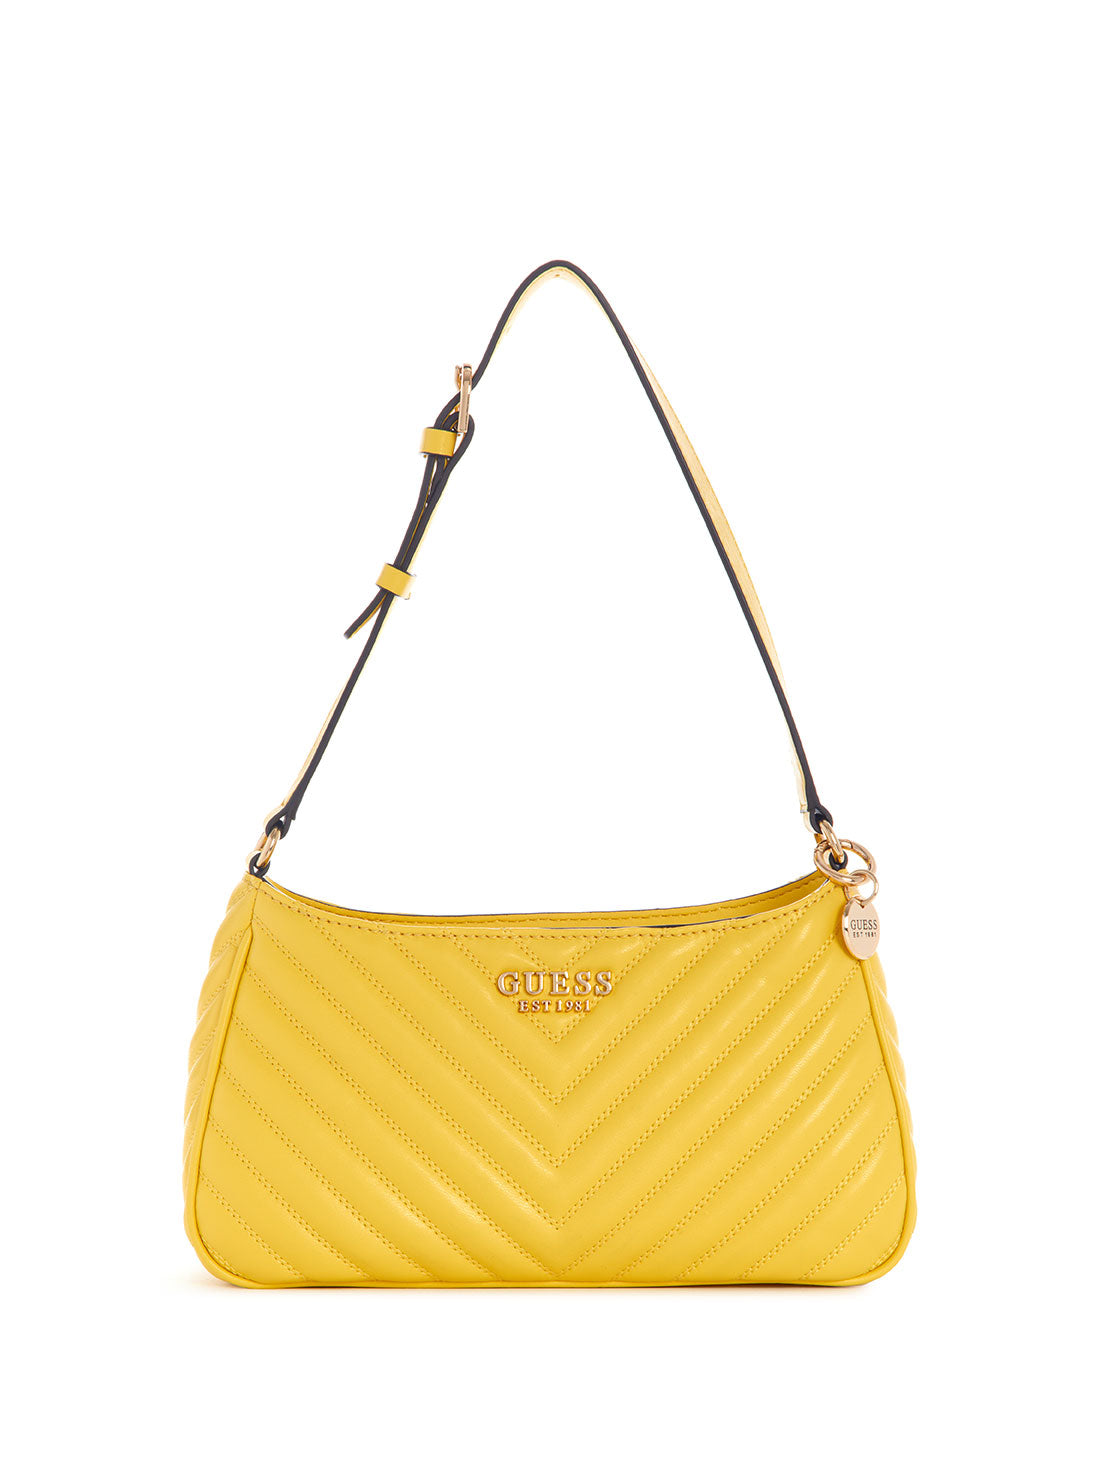 GUESS Women's Yellow Keillah Quilted Shoulder Bag QG869018 Front View